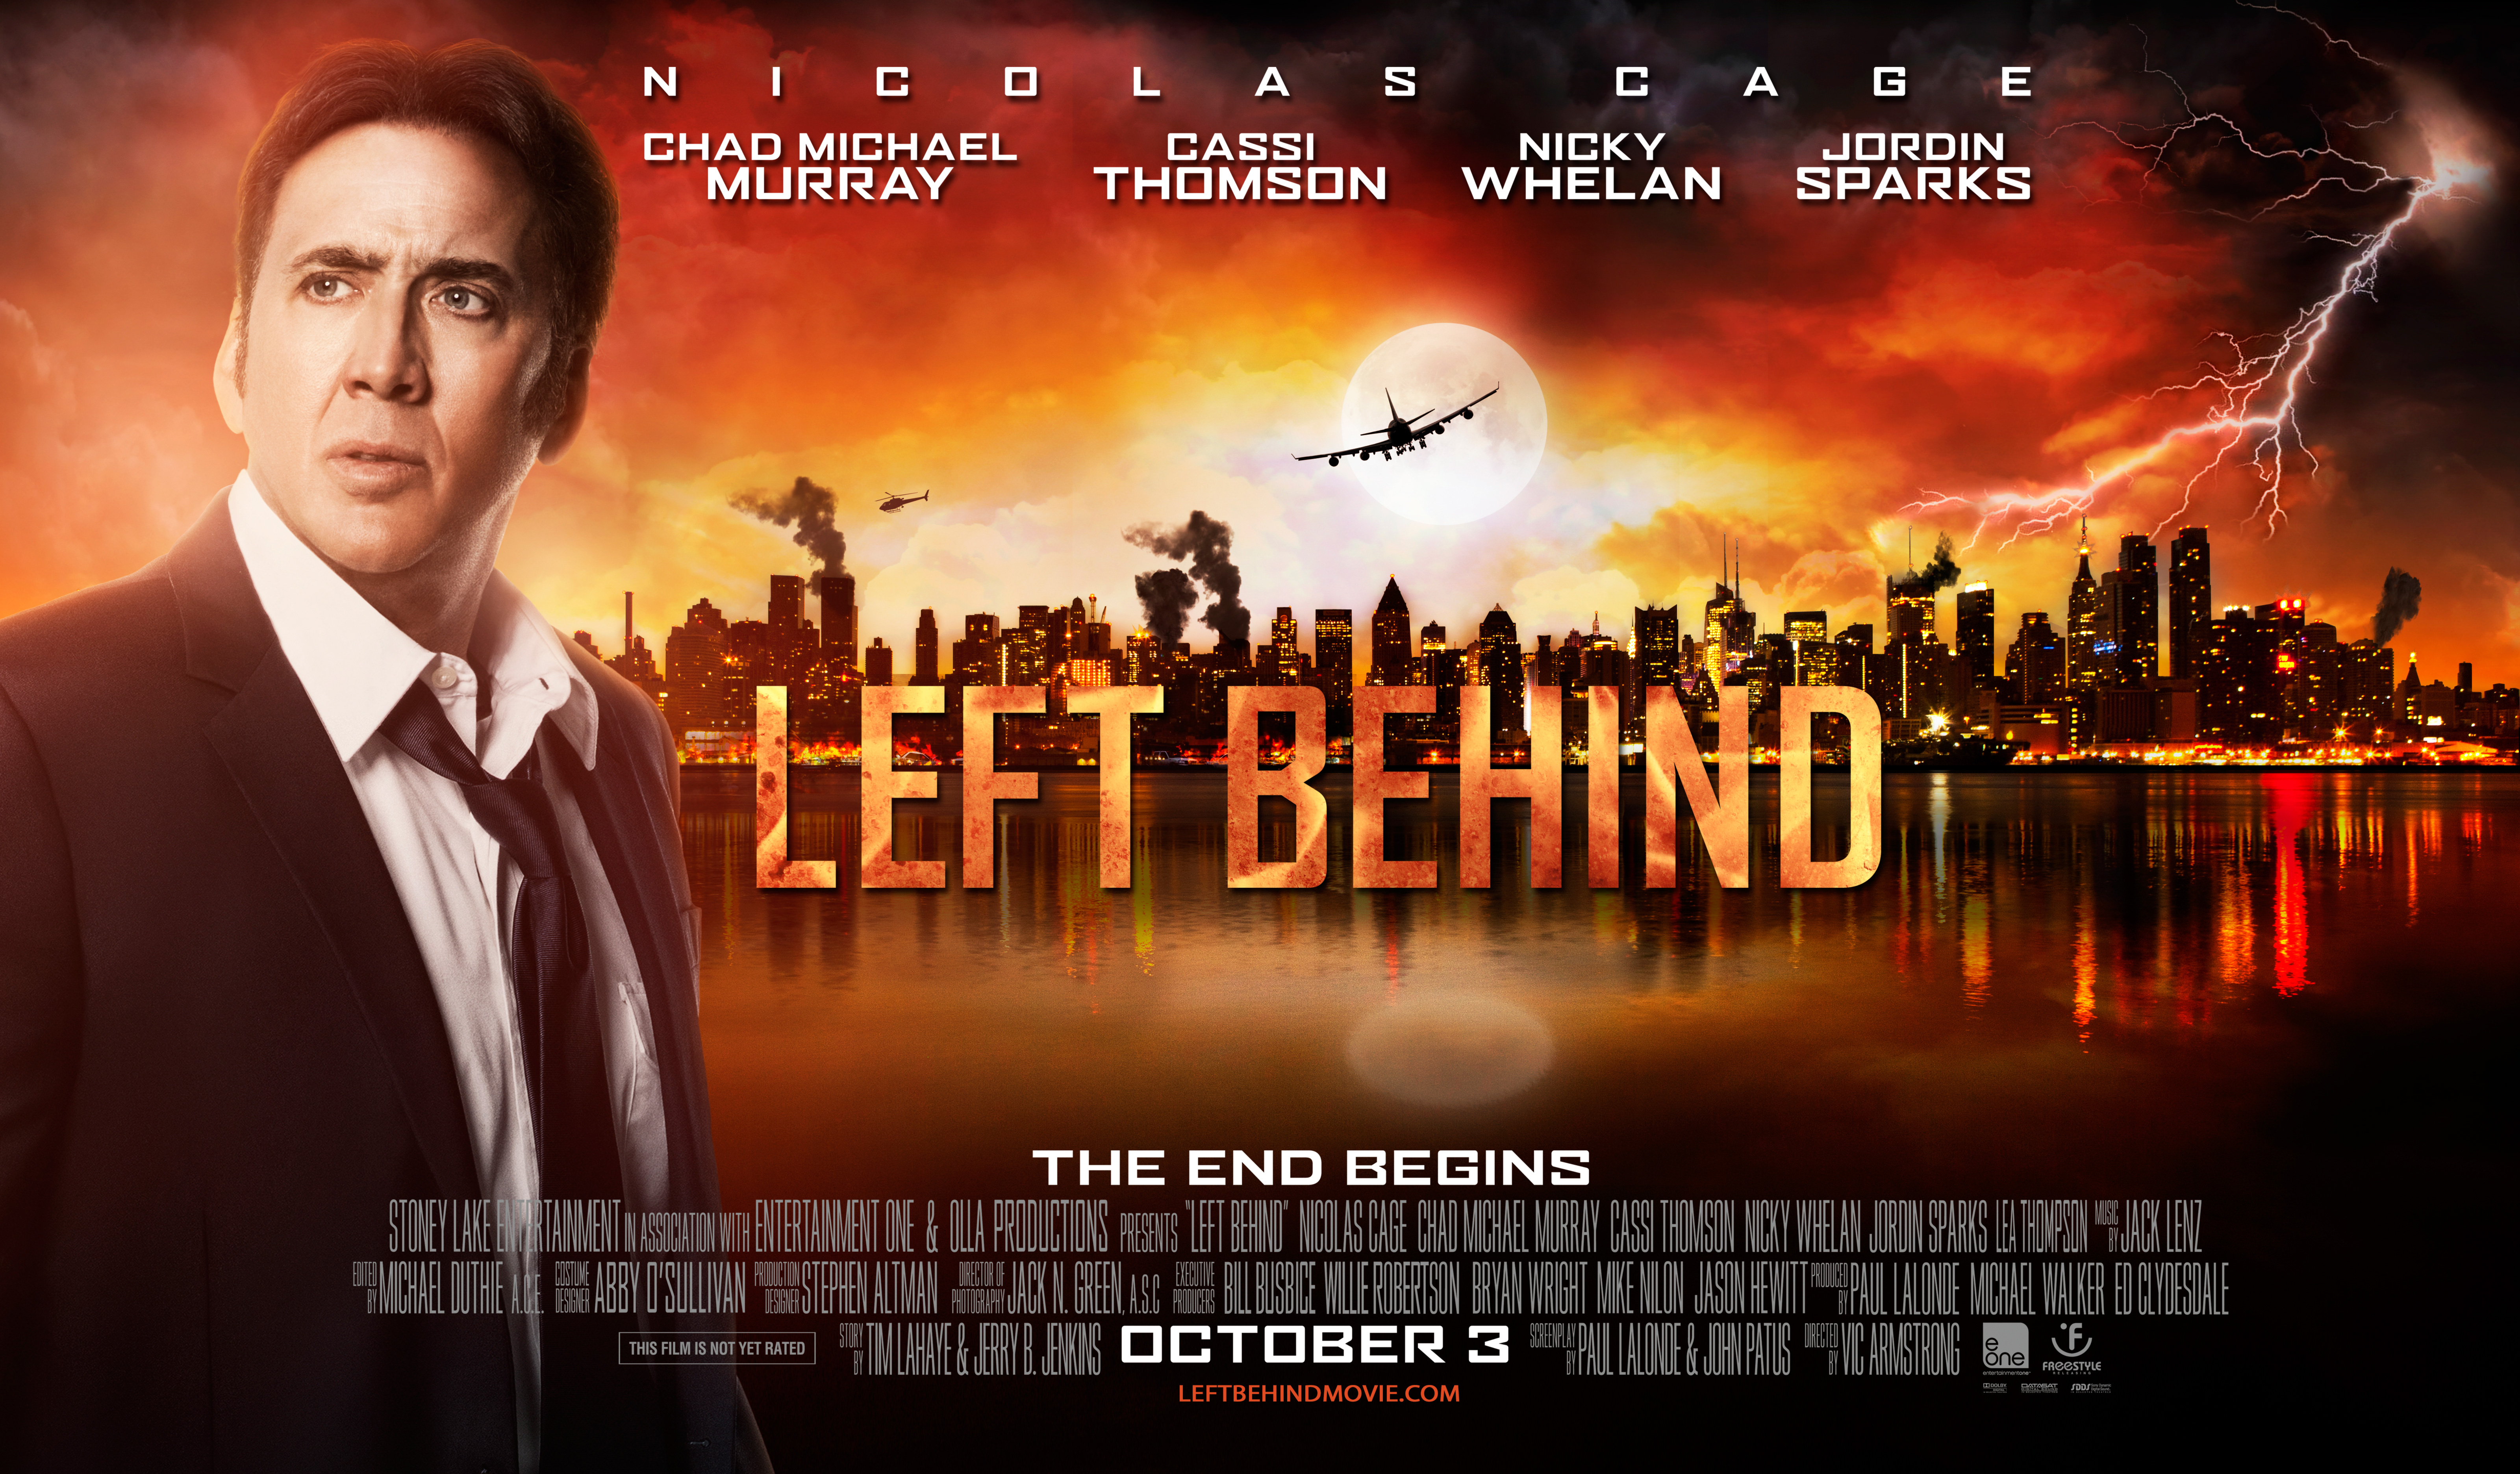 Movie Review: Left Behind - Jeanne Dennis - Heritage of Truth